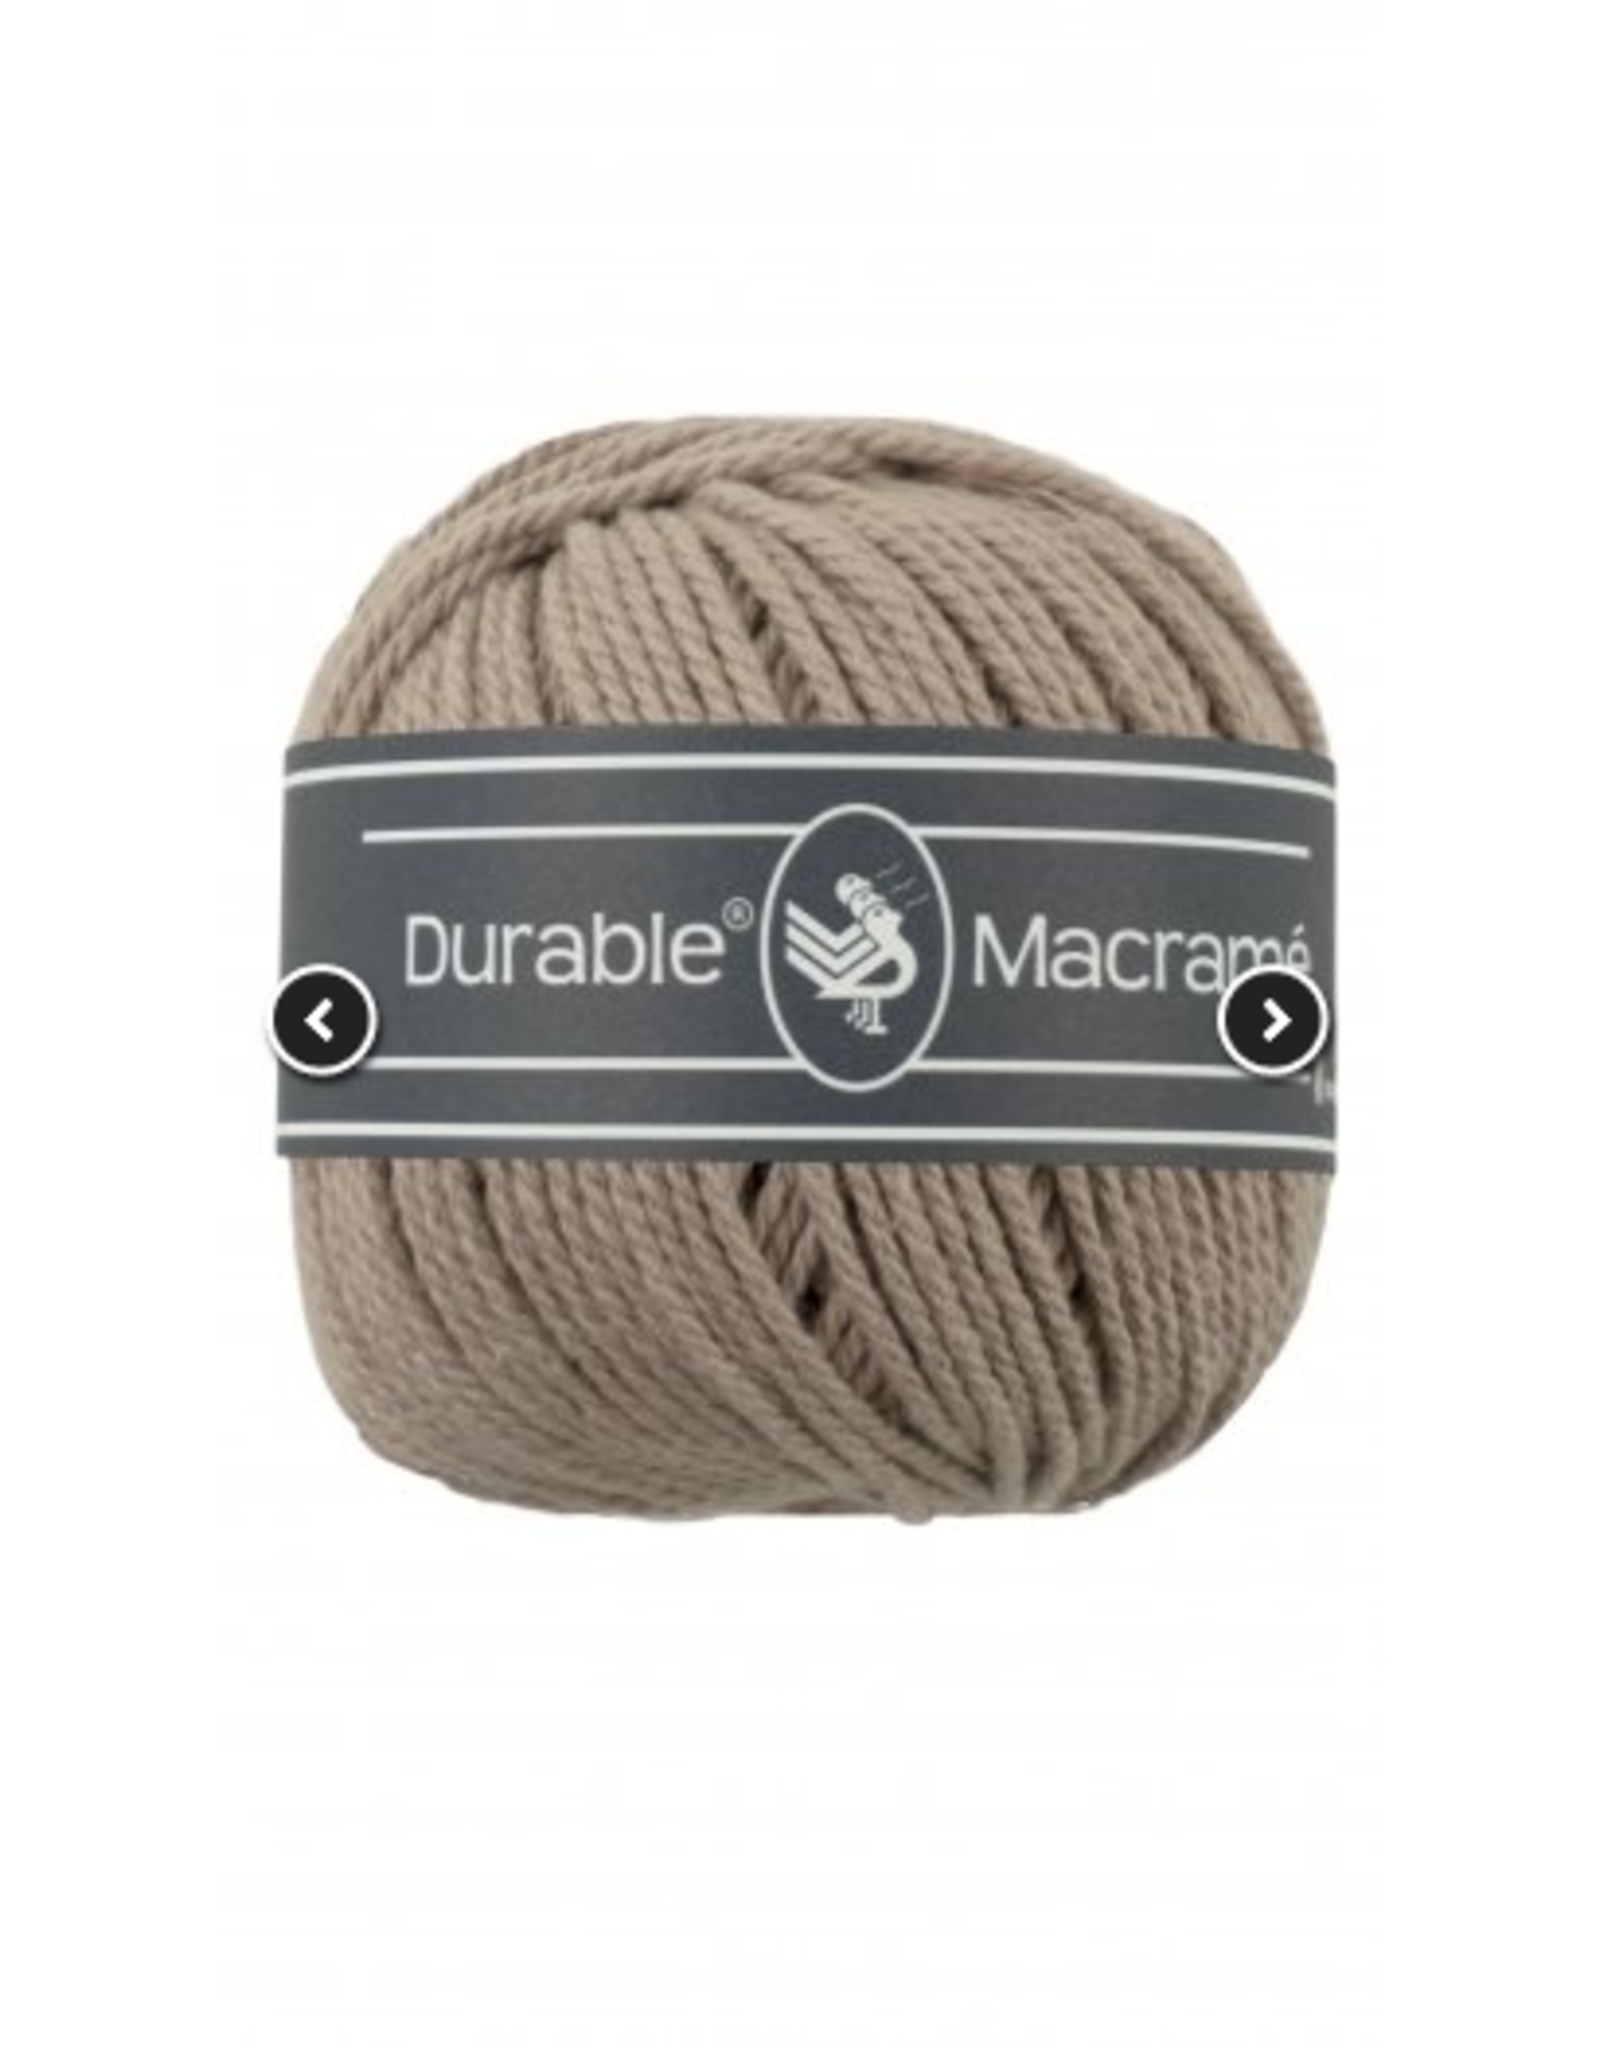 Durable Durable Macrame 340 taupe